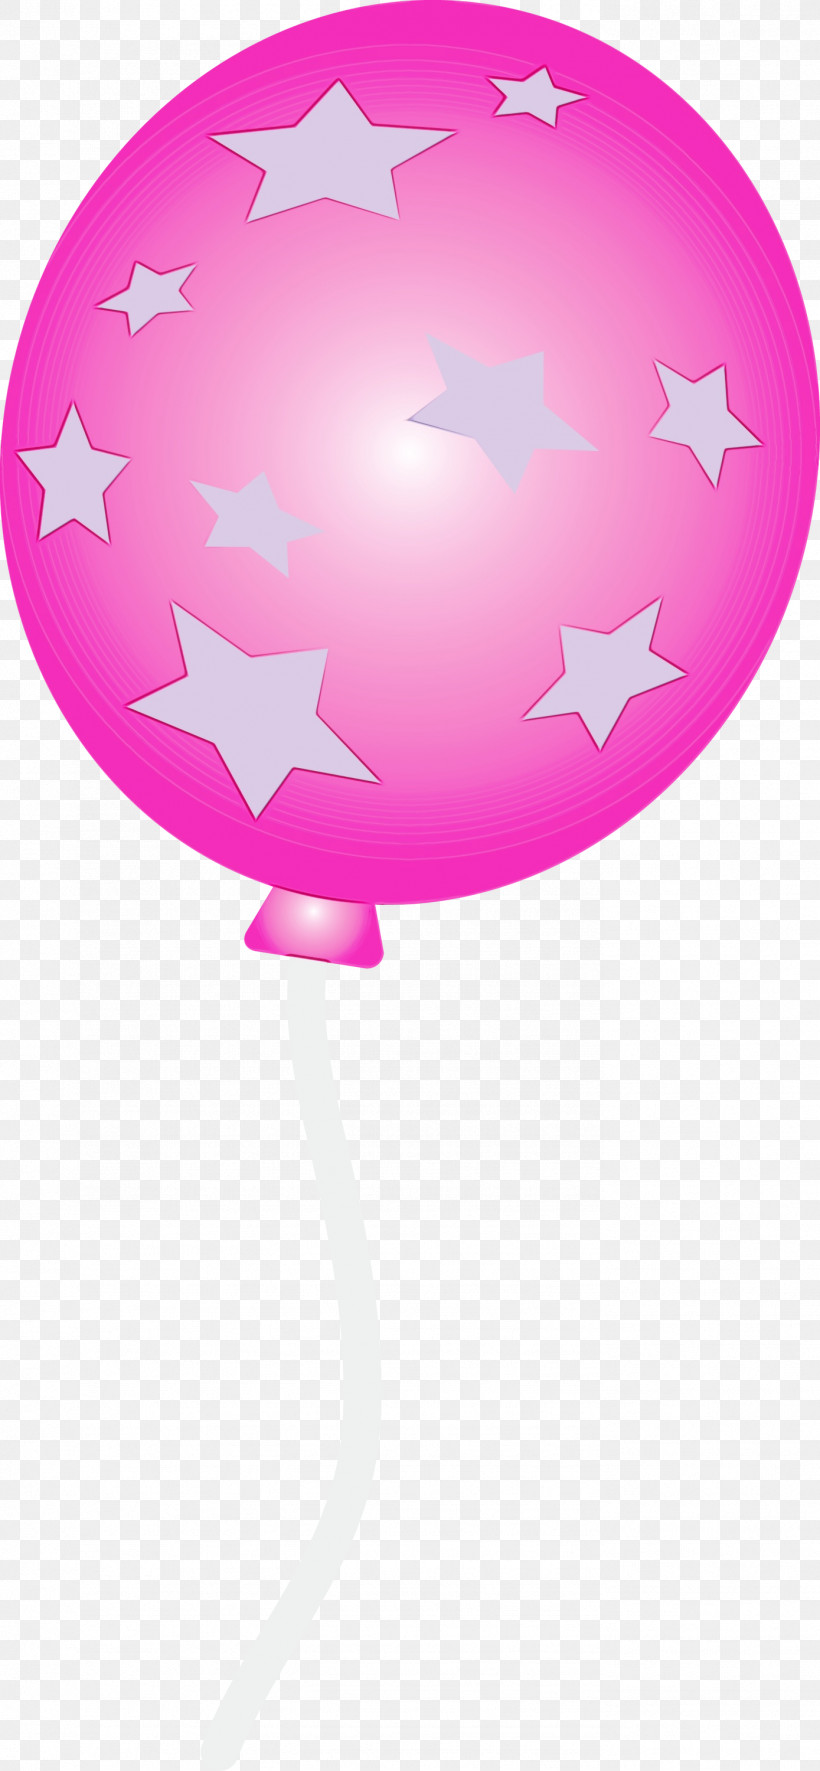 Balloon Pink Magenta Party Supply, PNG, 1389x3000px, Balloon, Magenta, Paint, Party Supply, Pink Download Free